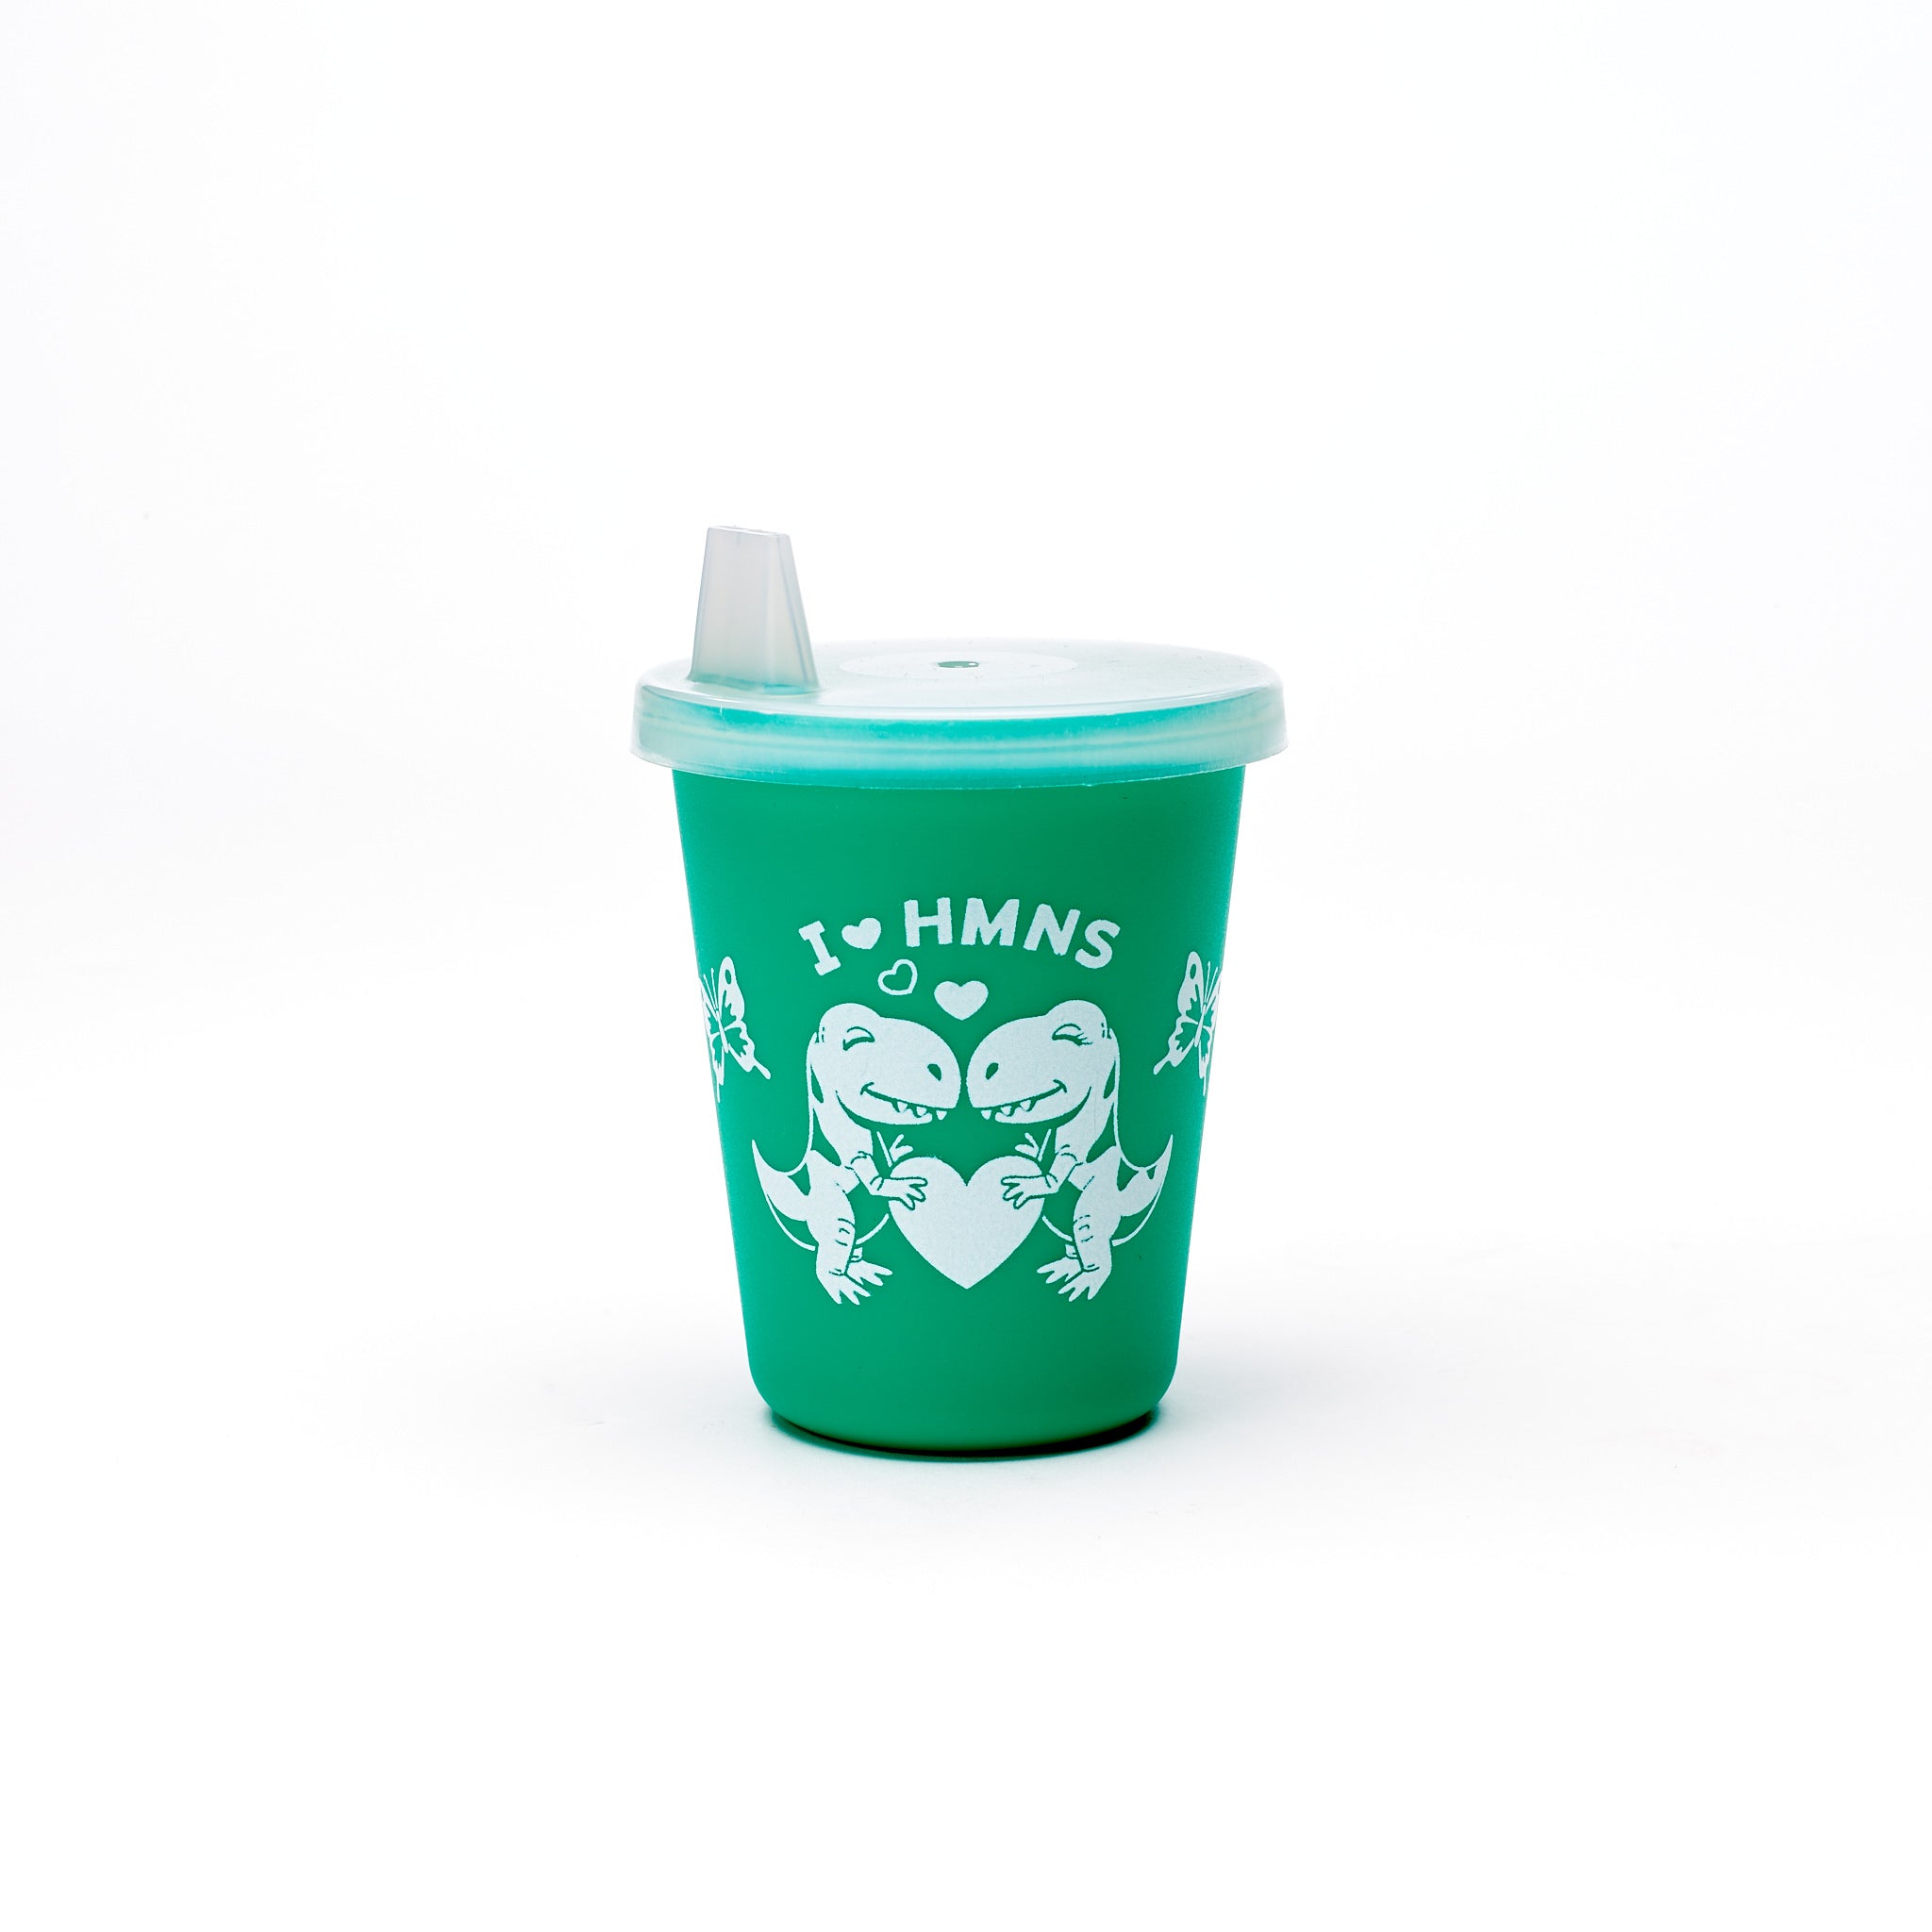 HMNS Dinosaur & Butterfly Sippy Cup